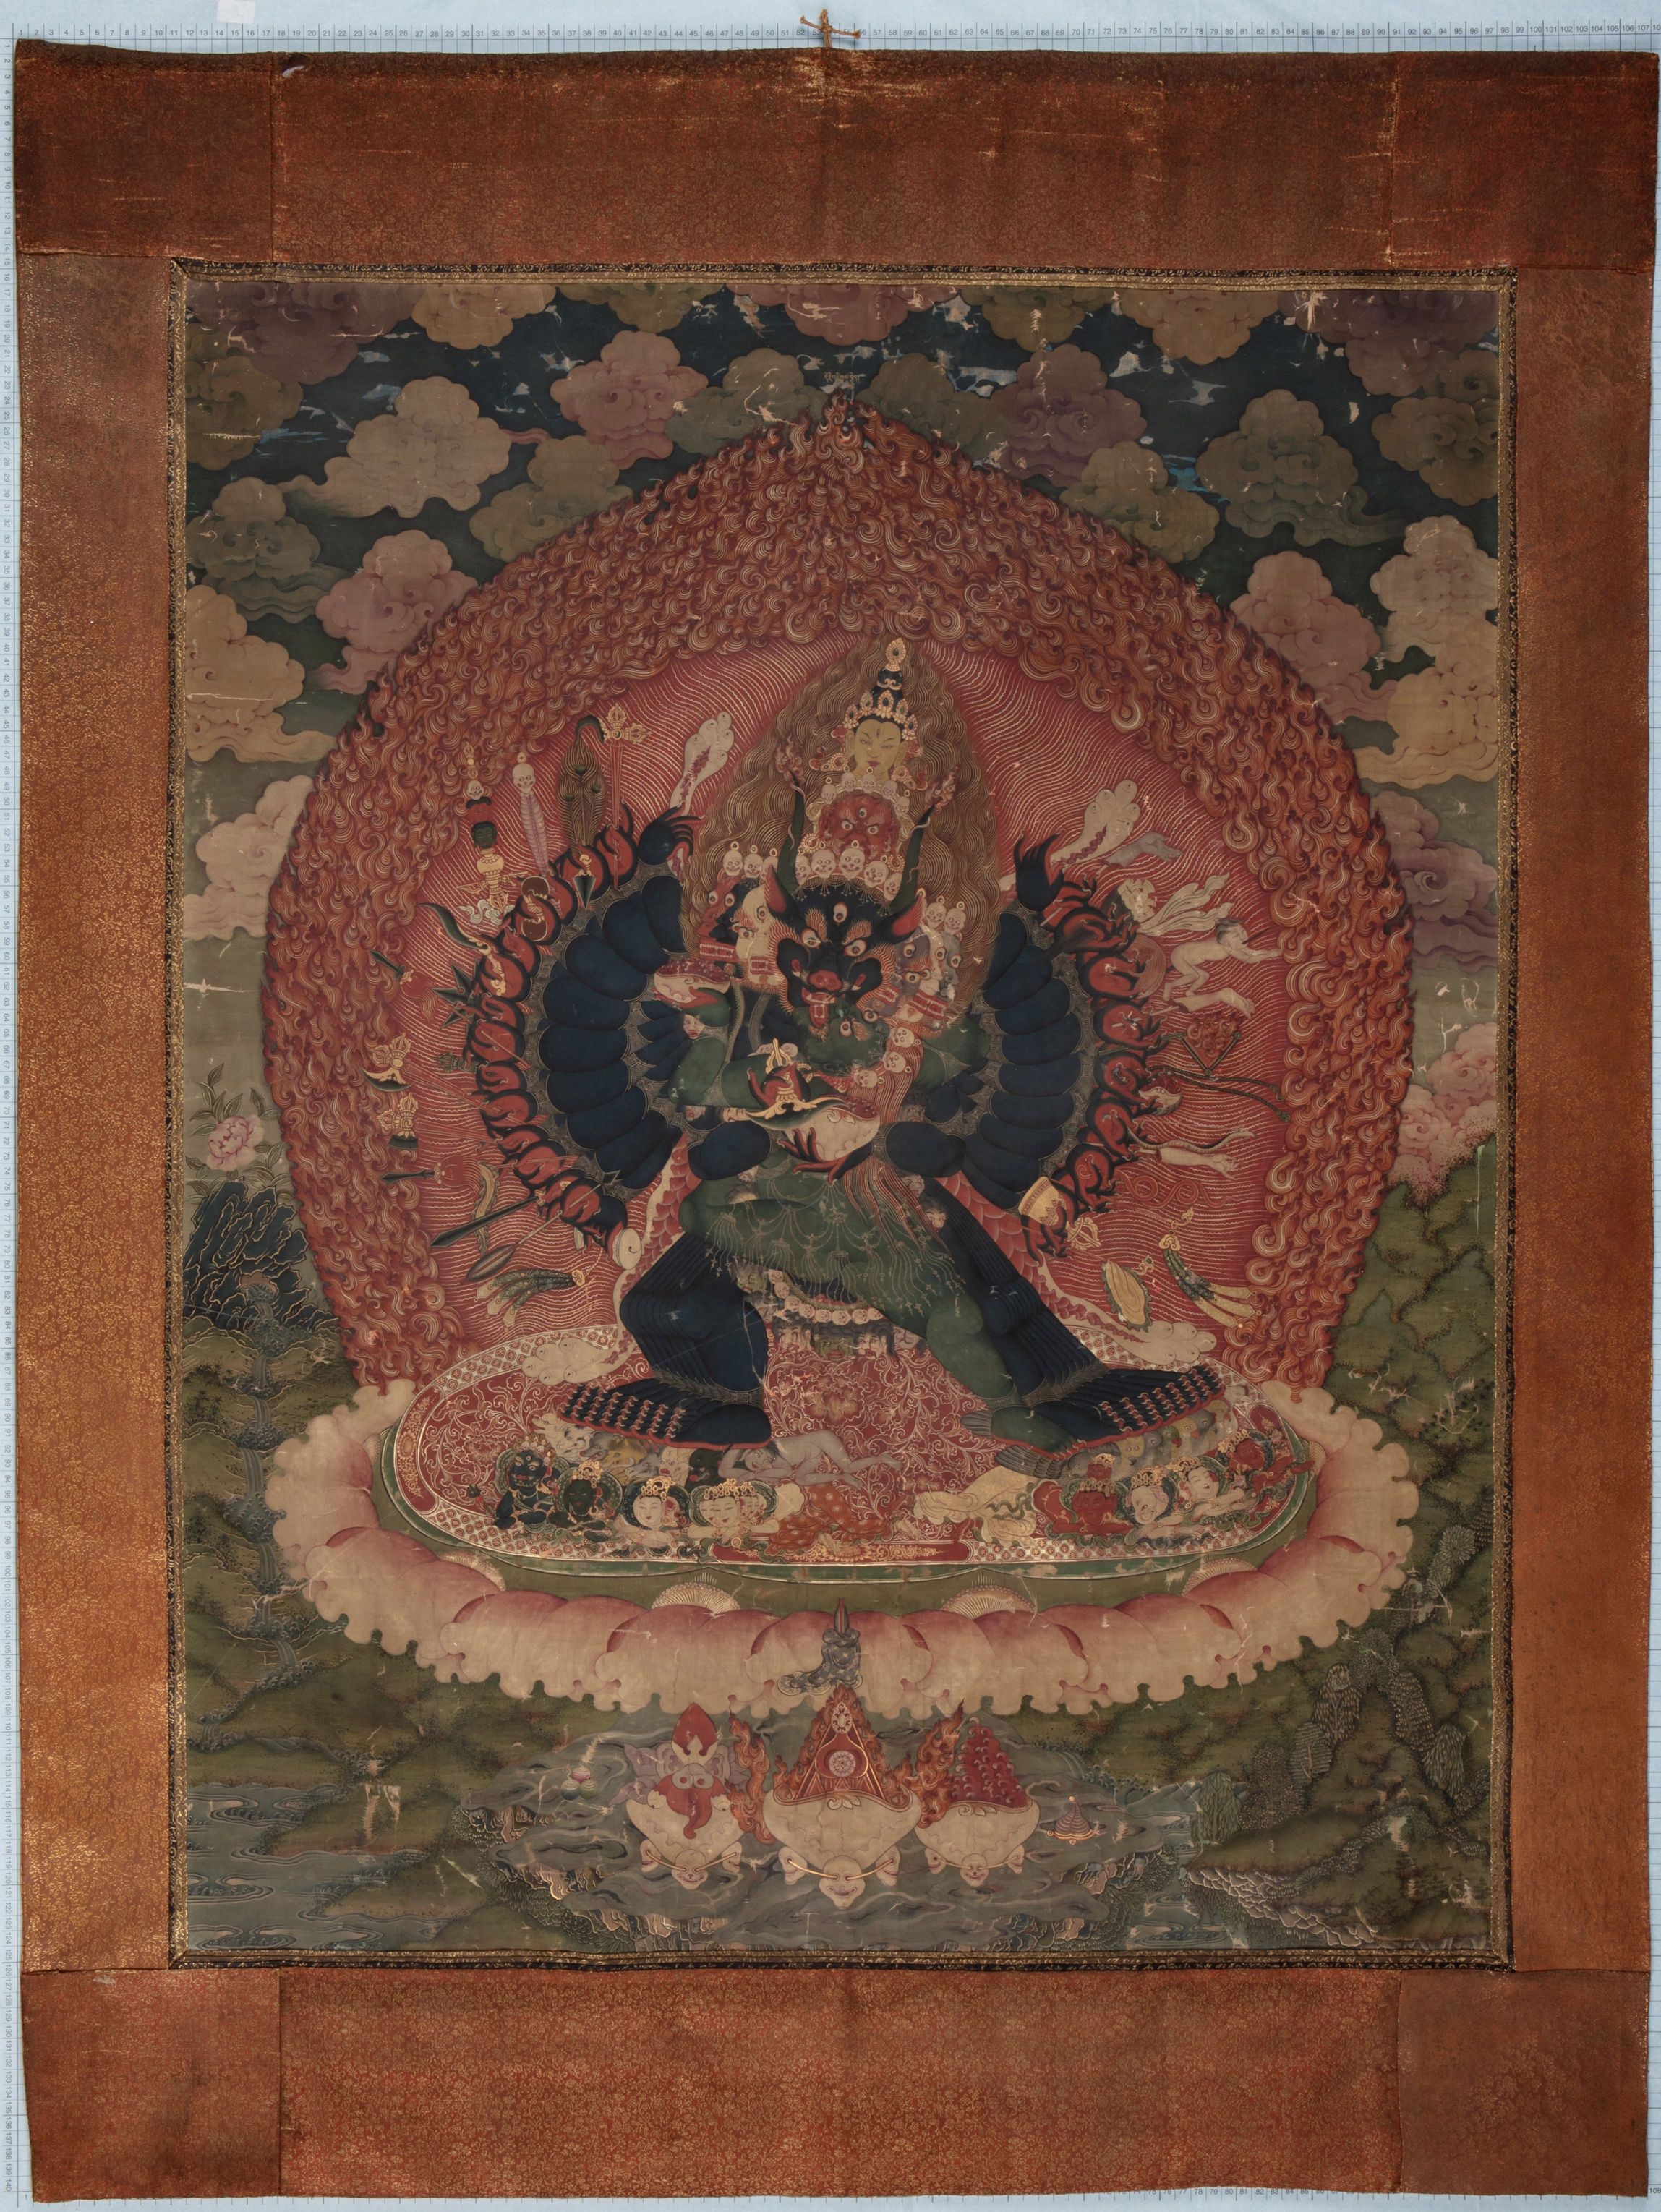 Image showing the Yamantaka Thangka after conservation. Image by Palace Museum.